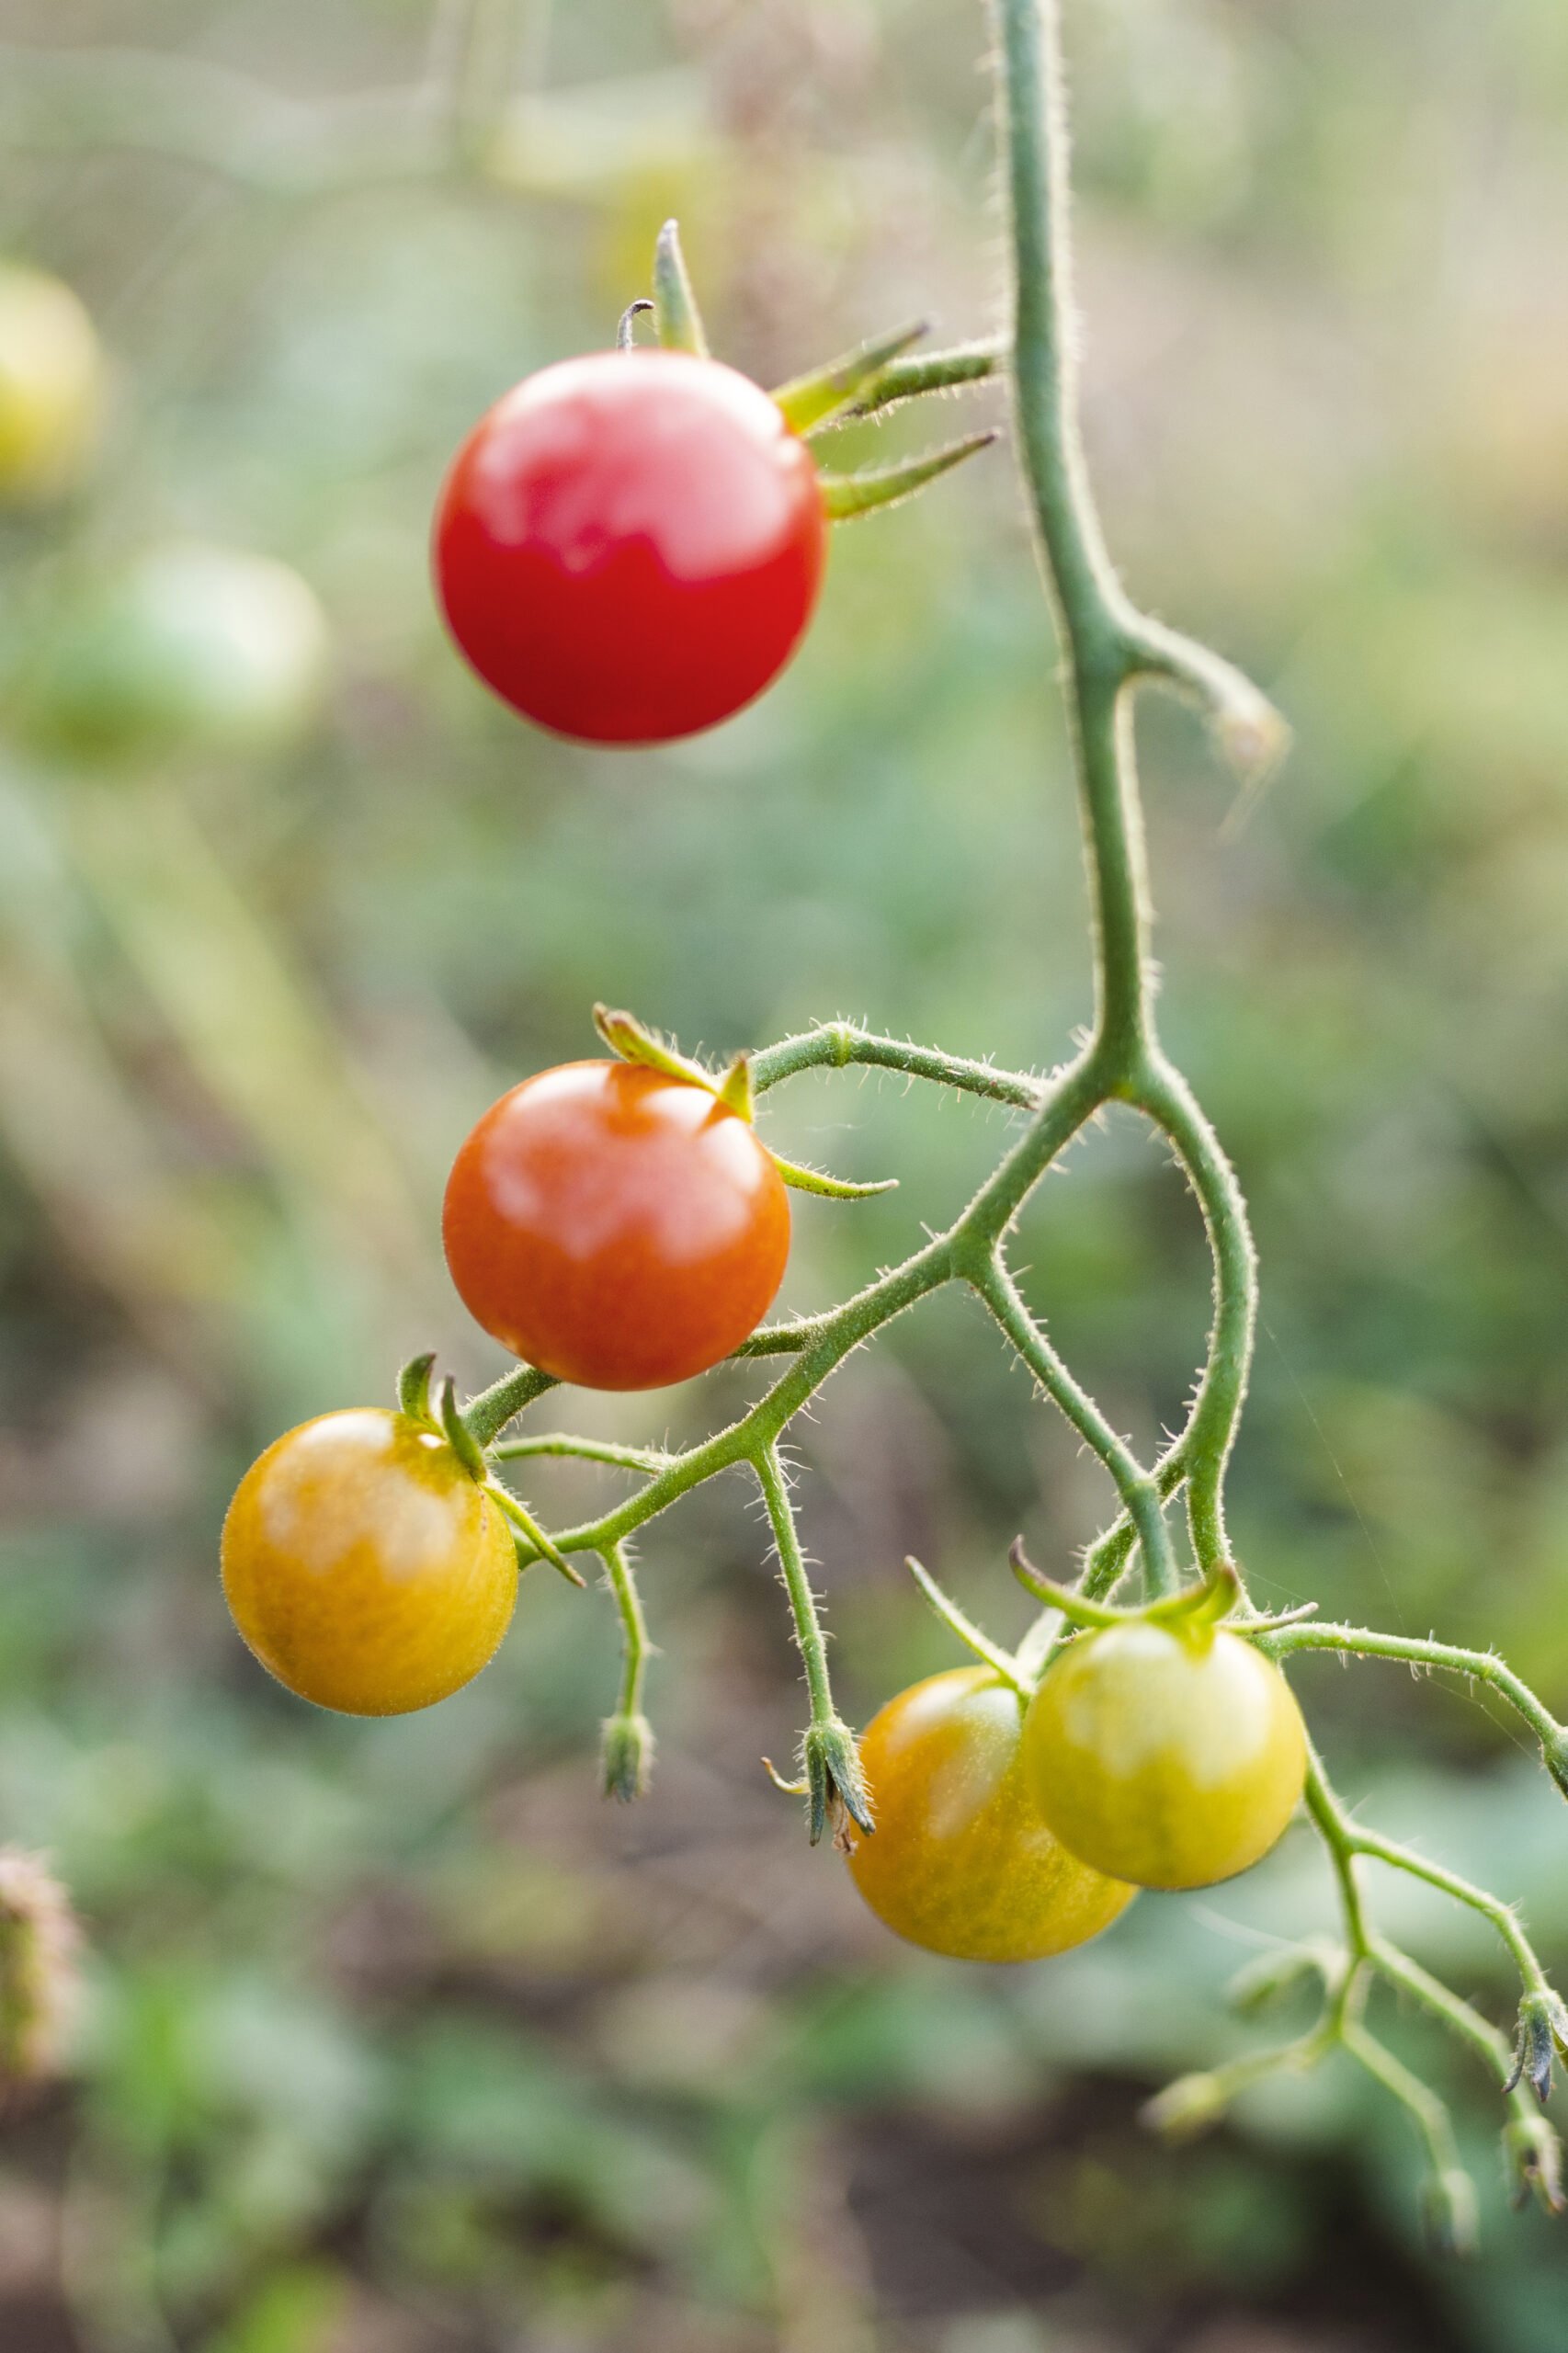 Is the Tomato Plant A Herb or Shrub?